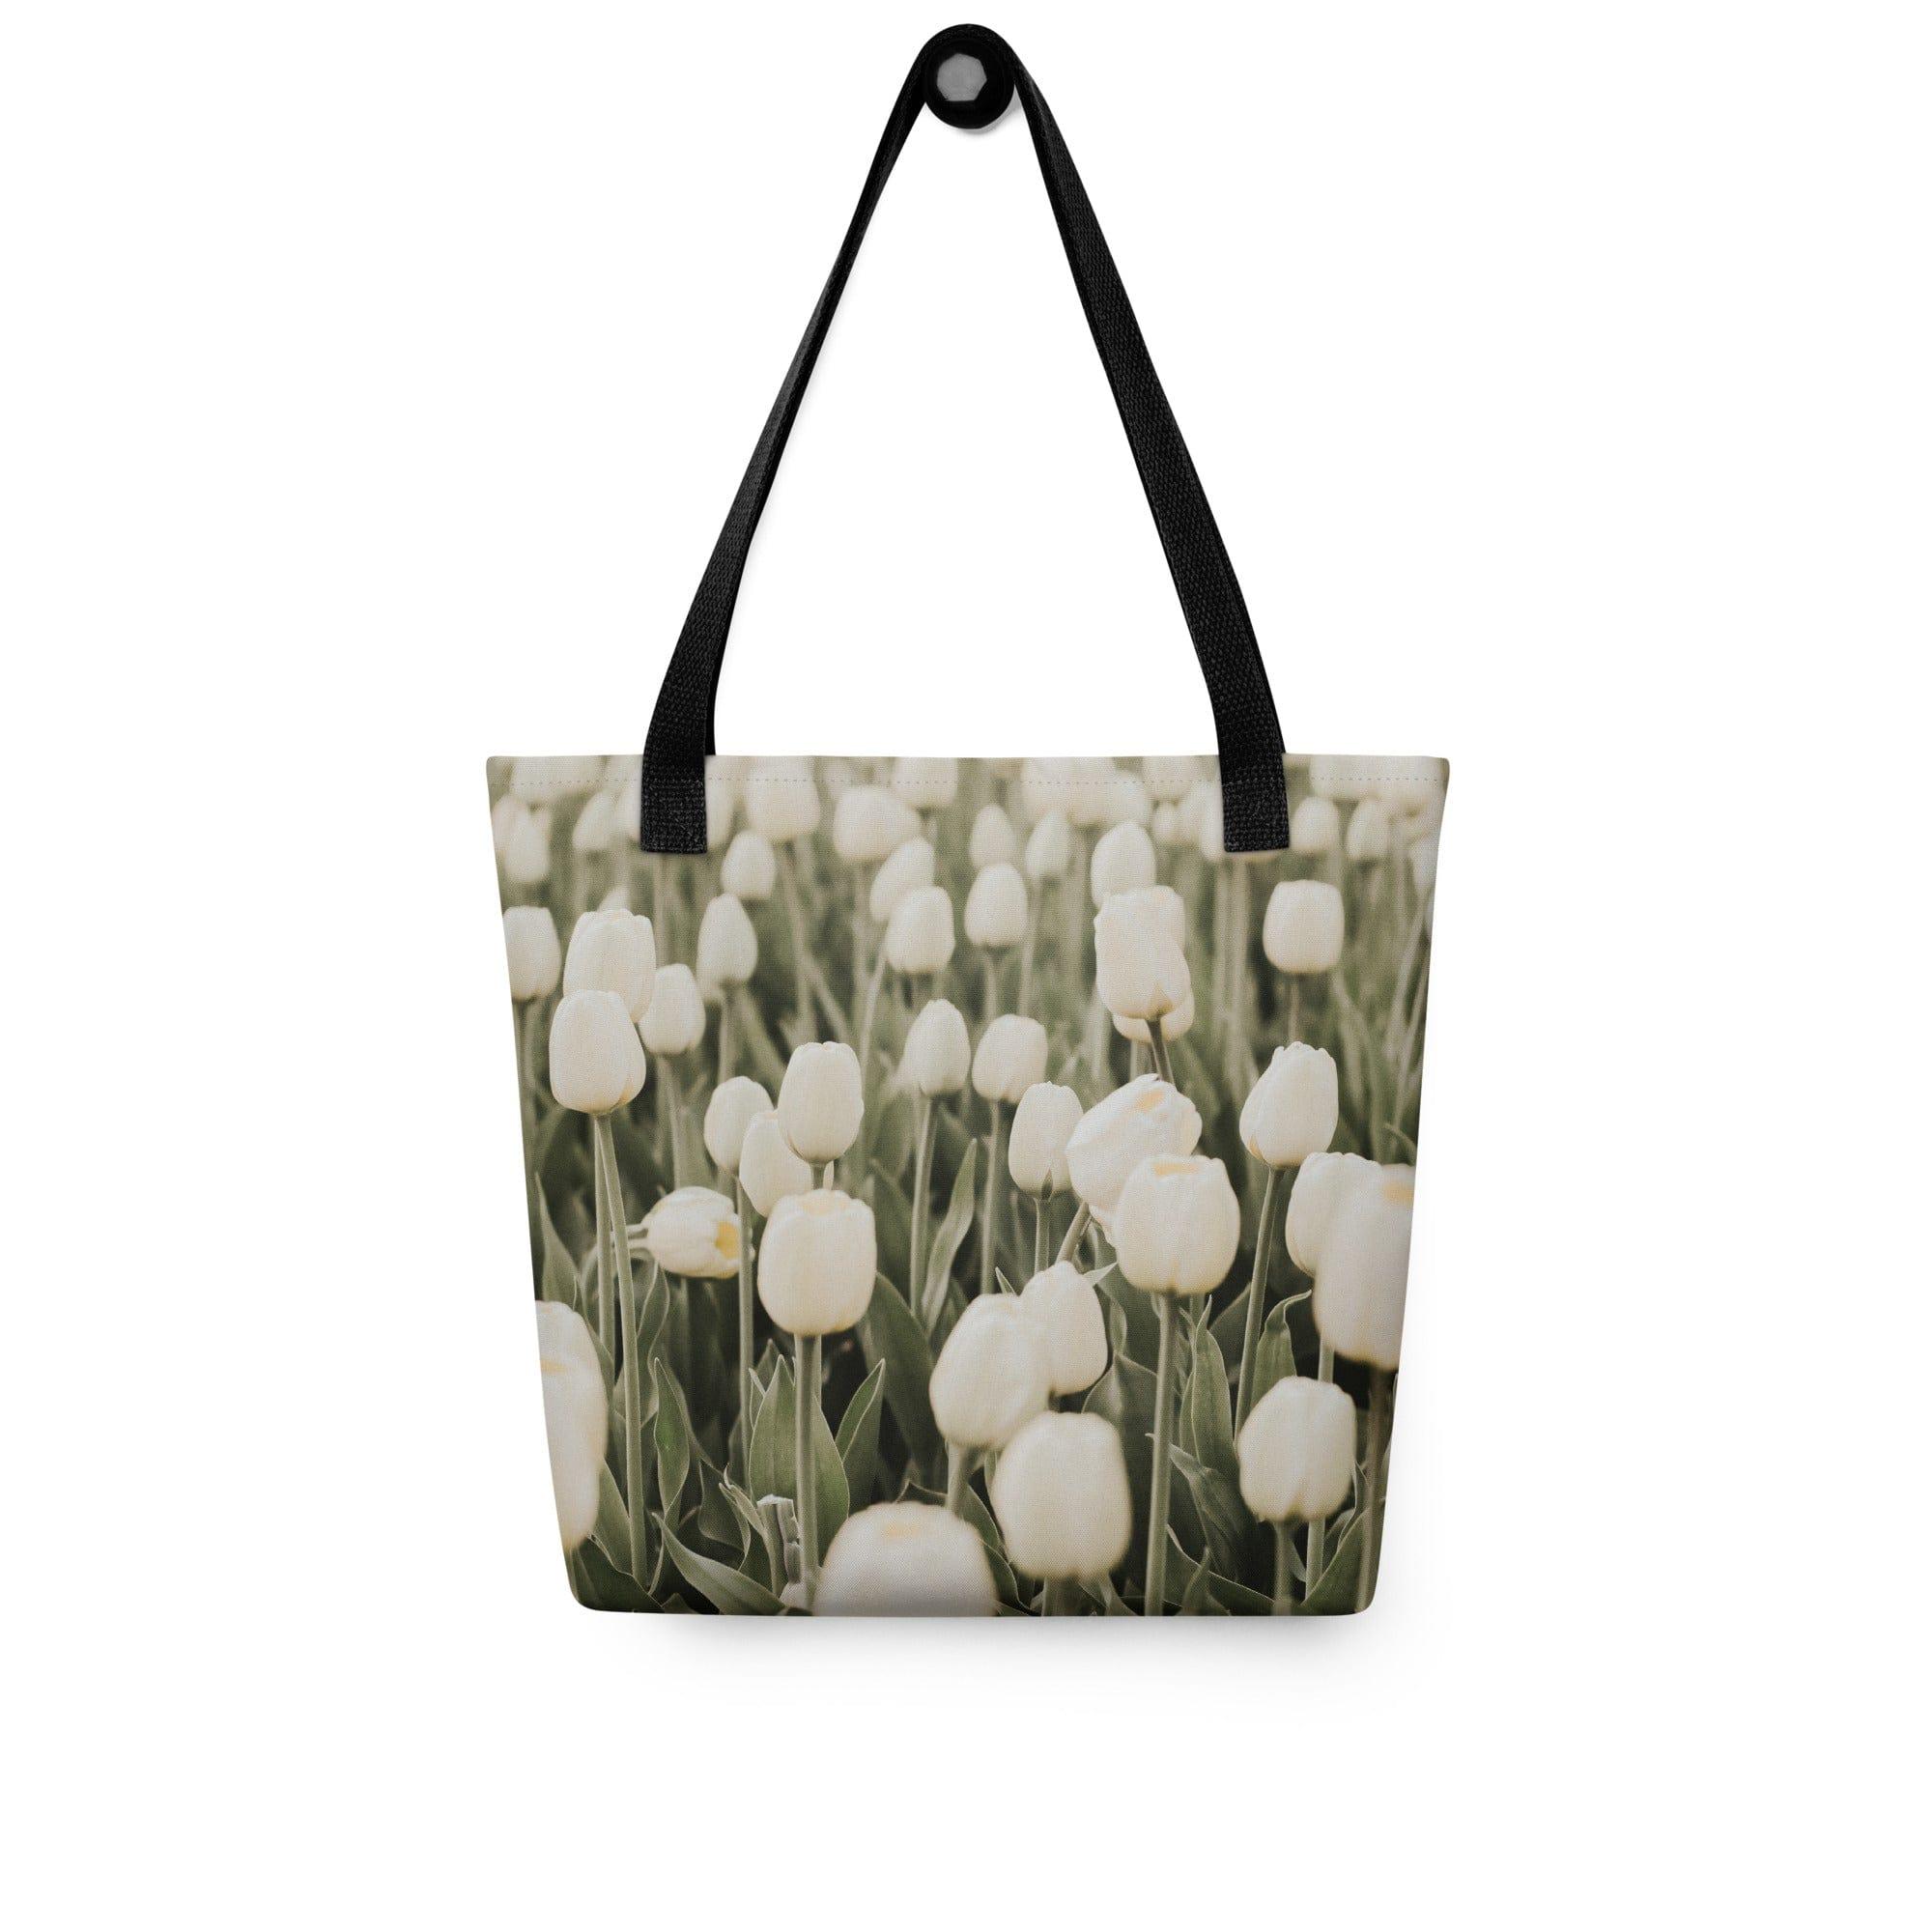 "Field of White Tulip Flowers" Printed Tote Bag by Twin Dollar - Embrace Nature's Beauty in Style! - TWIN DOLLAR